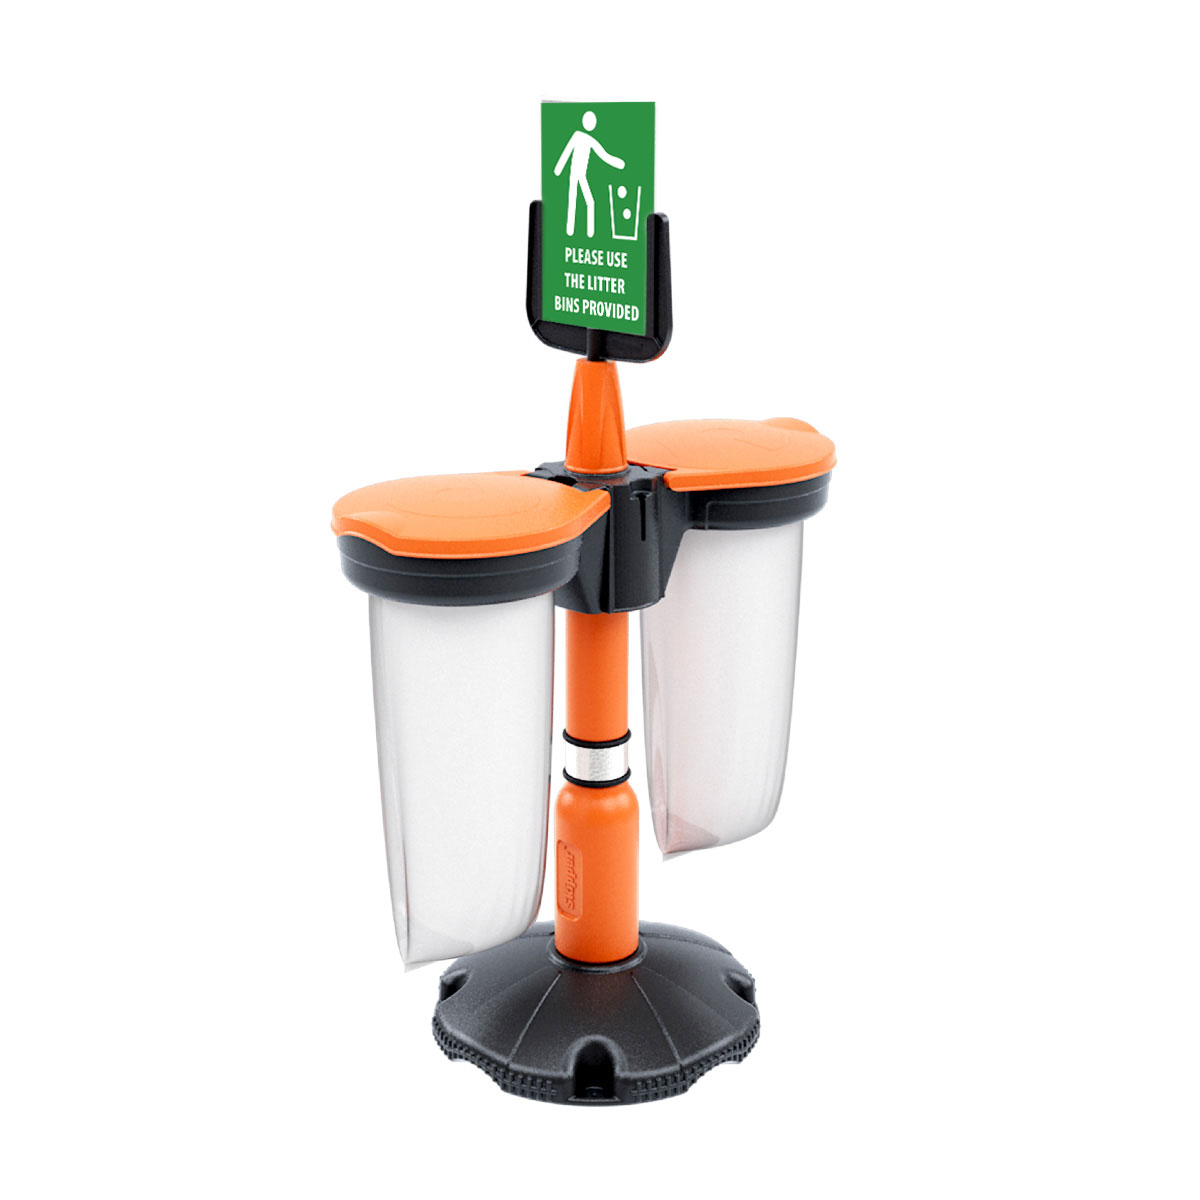 Skipper™ Safety Station With 2x Recycling Bins in Orange - Suitable For High-Traffic Locations Such as Events 